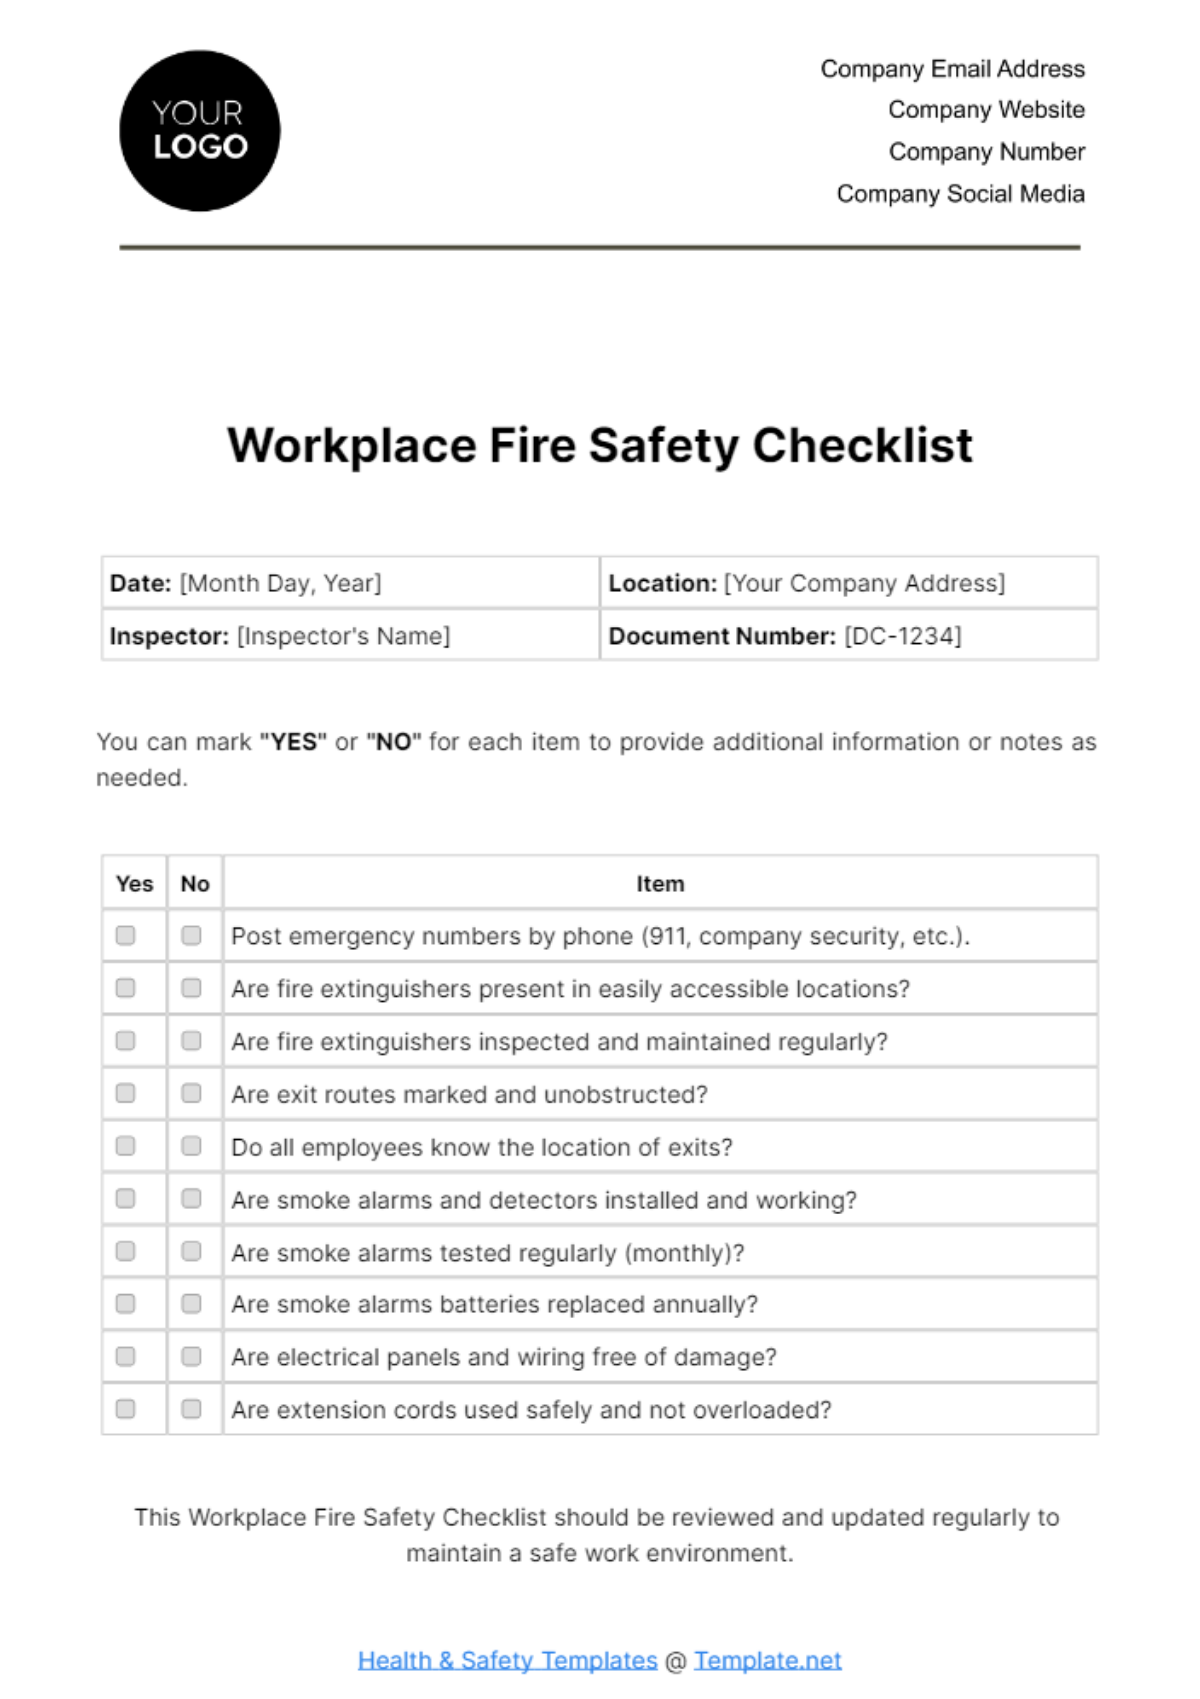 Free Workplace Fire Safety Checklist Template